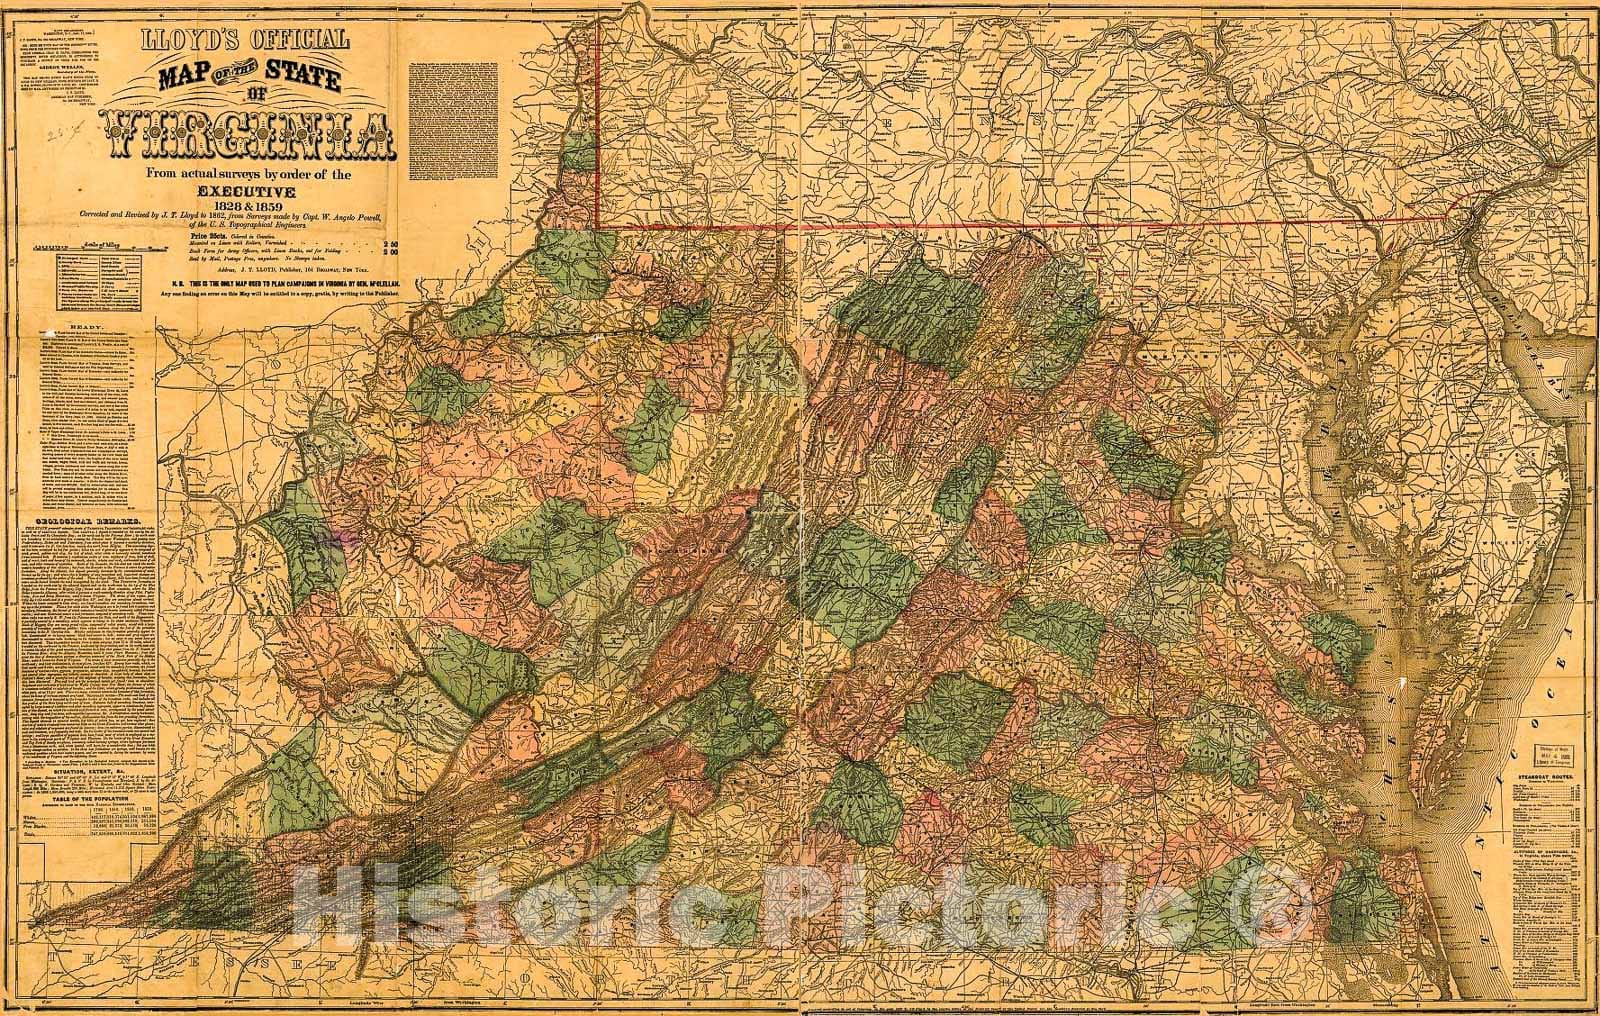 Historic 1862 Map - Lloyd's Official map of The State of Virginia : from Actual surveys by Order of The Executive 1828 & 1859